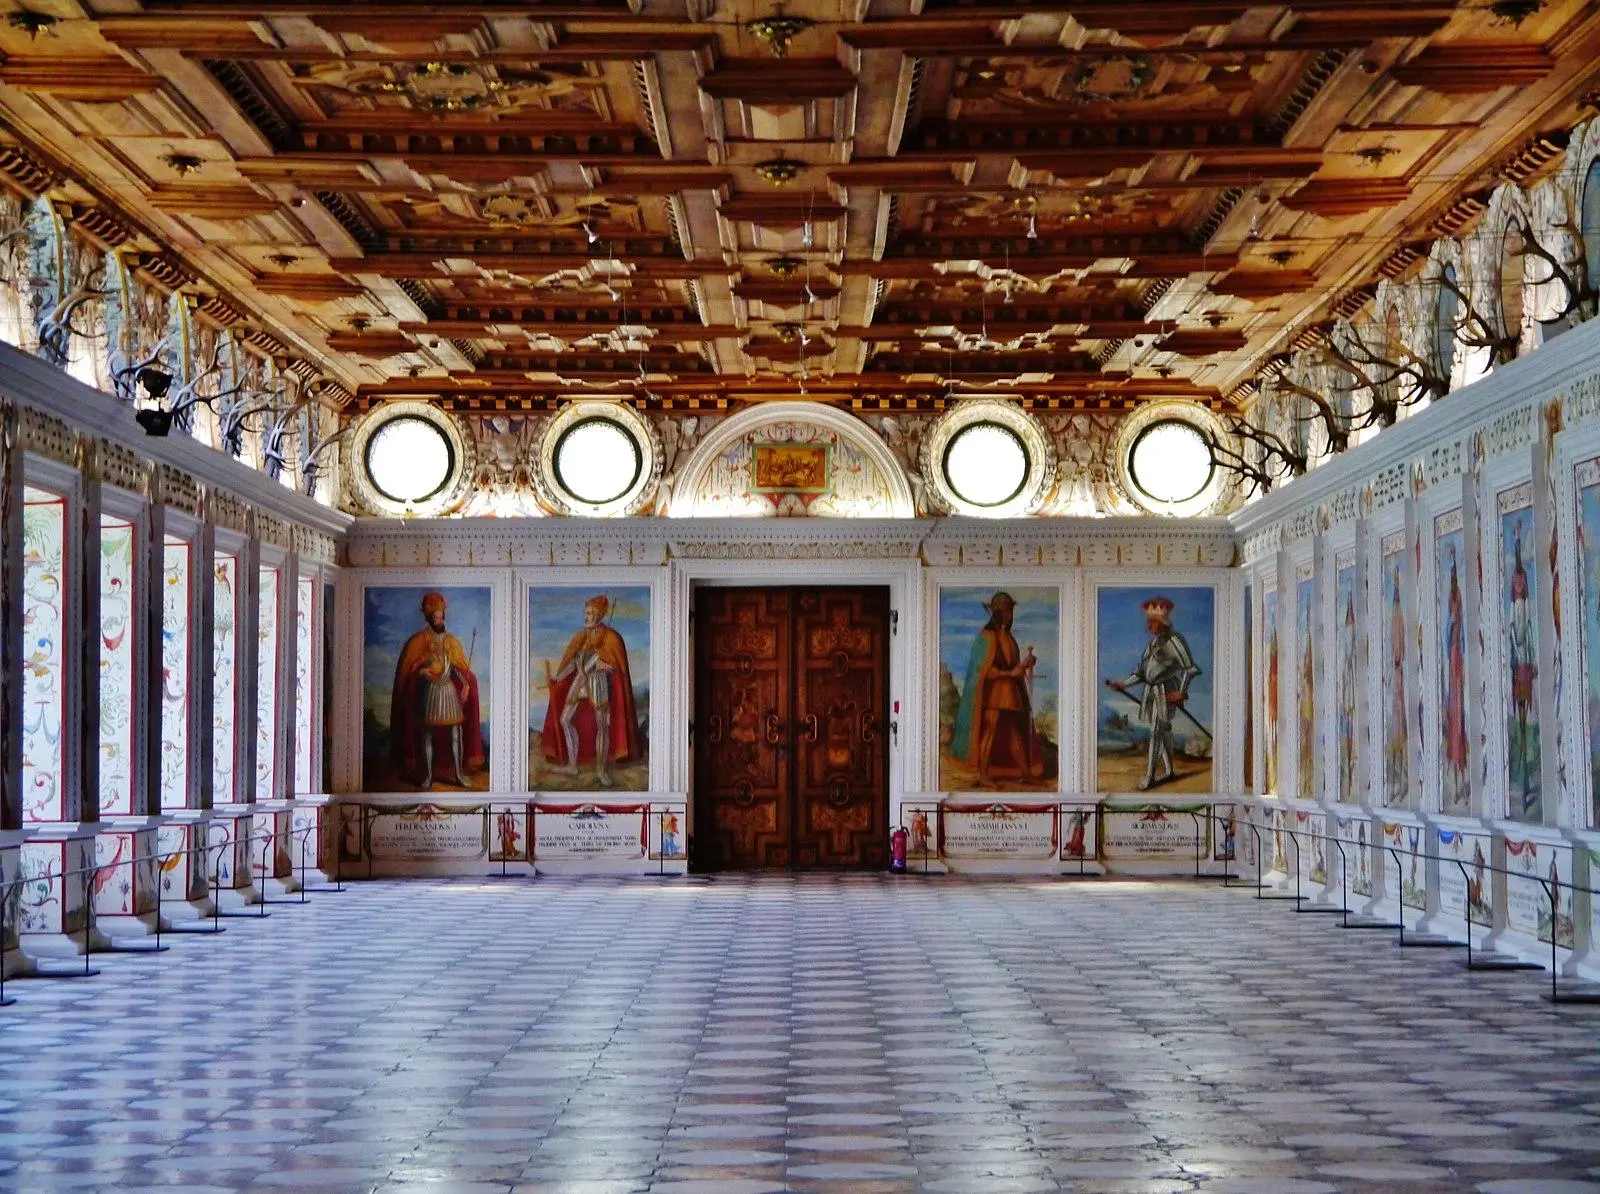 Spanish Hall of Ambras castle